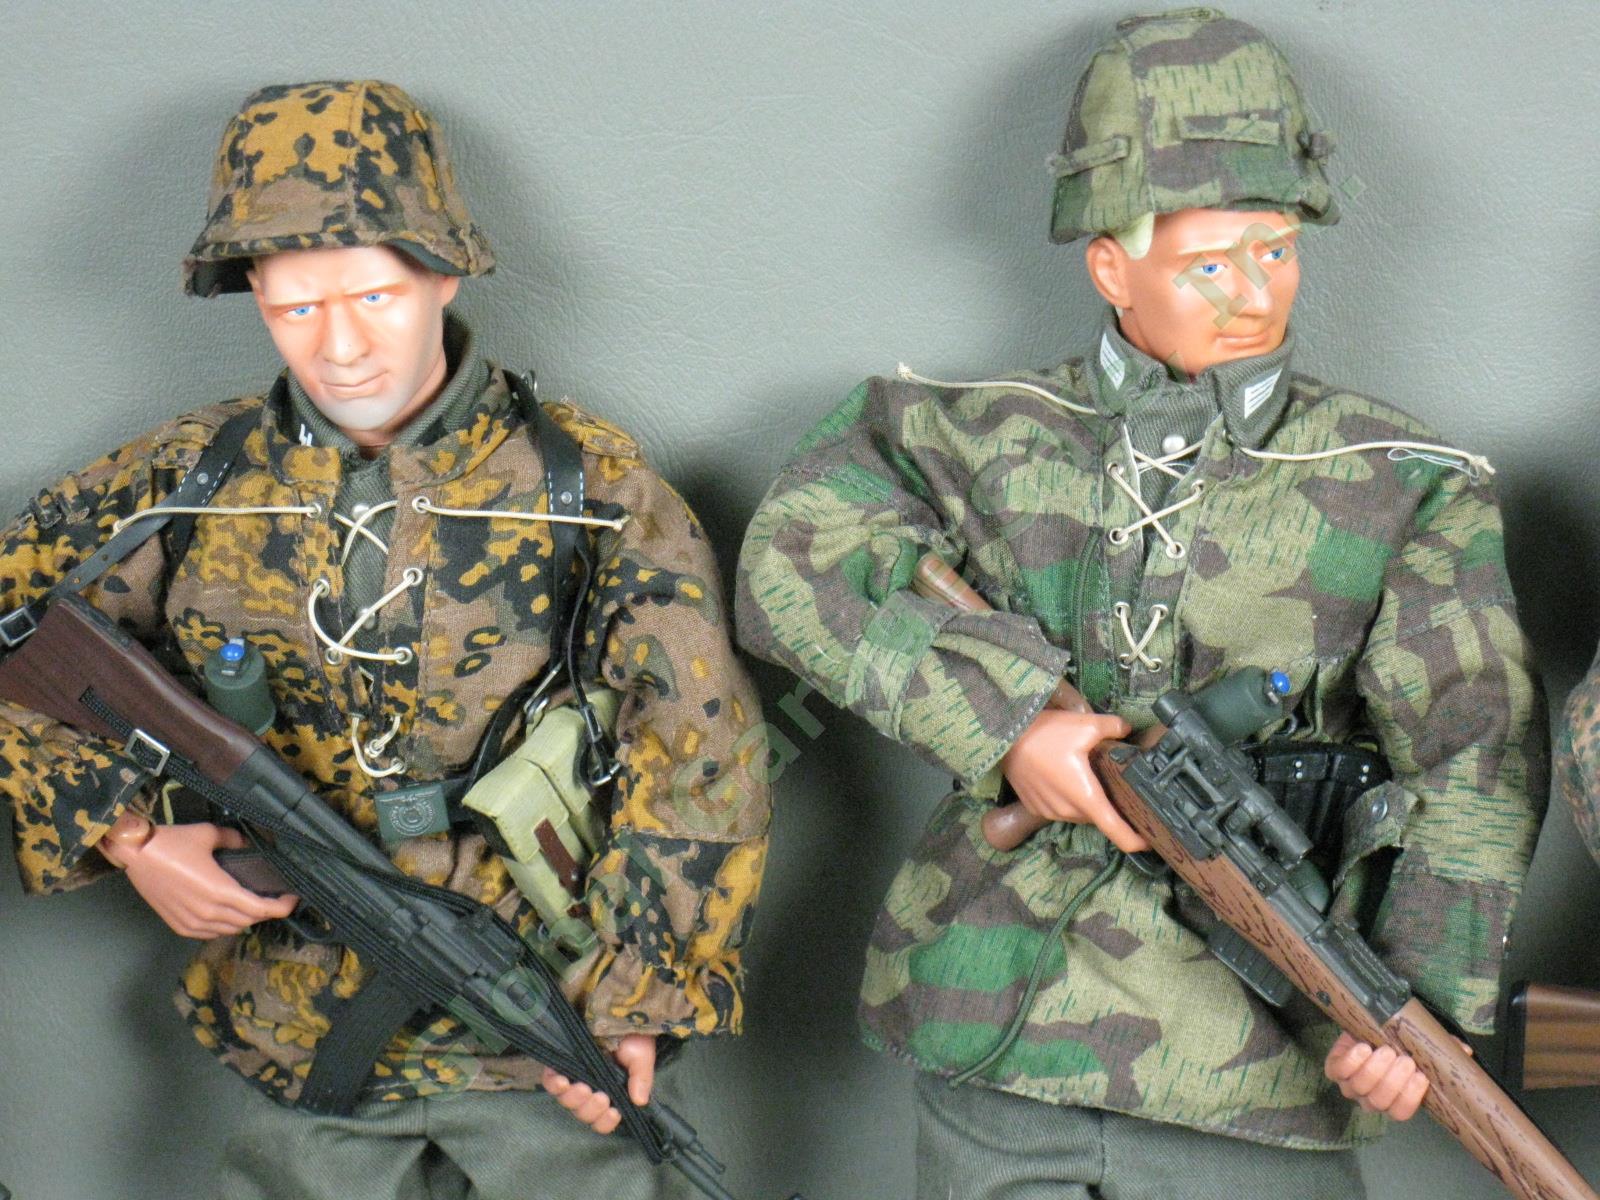 6 Dragon 1/6 Scale 12" WWII German Camo Army Soldier Figures Lot w/Accessories 4